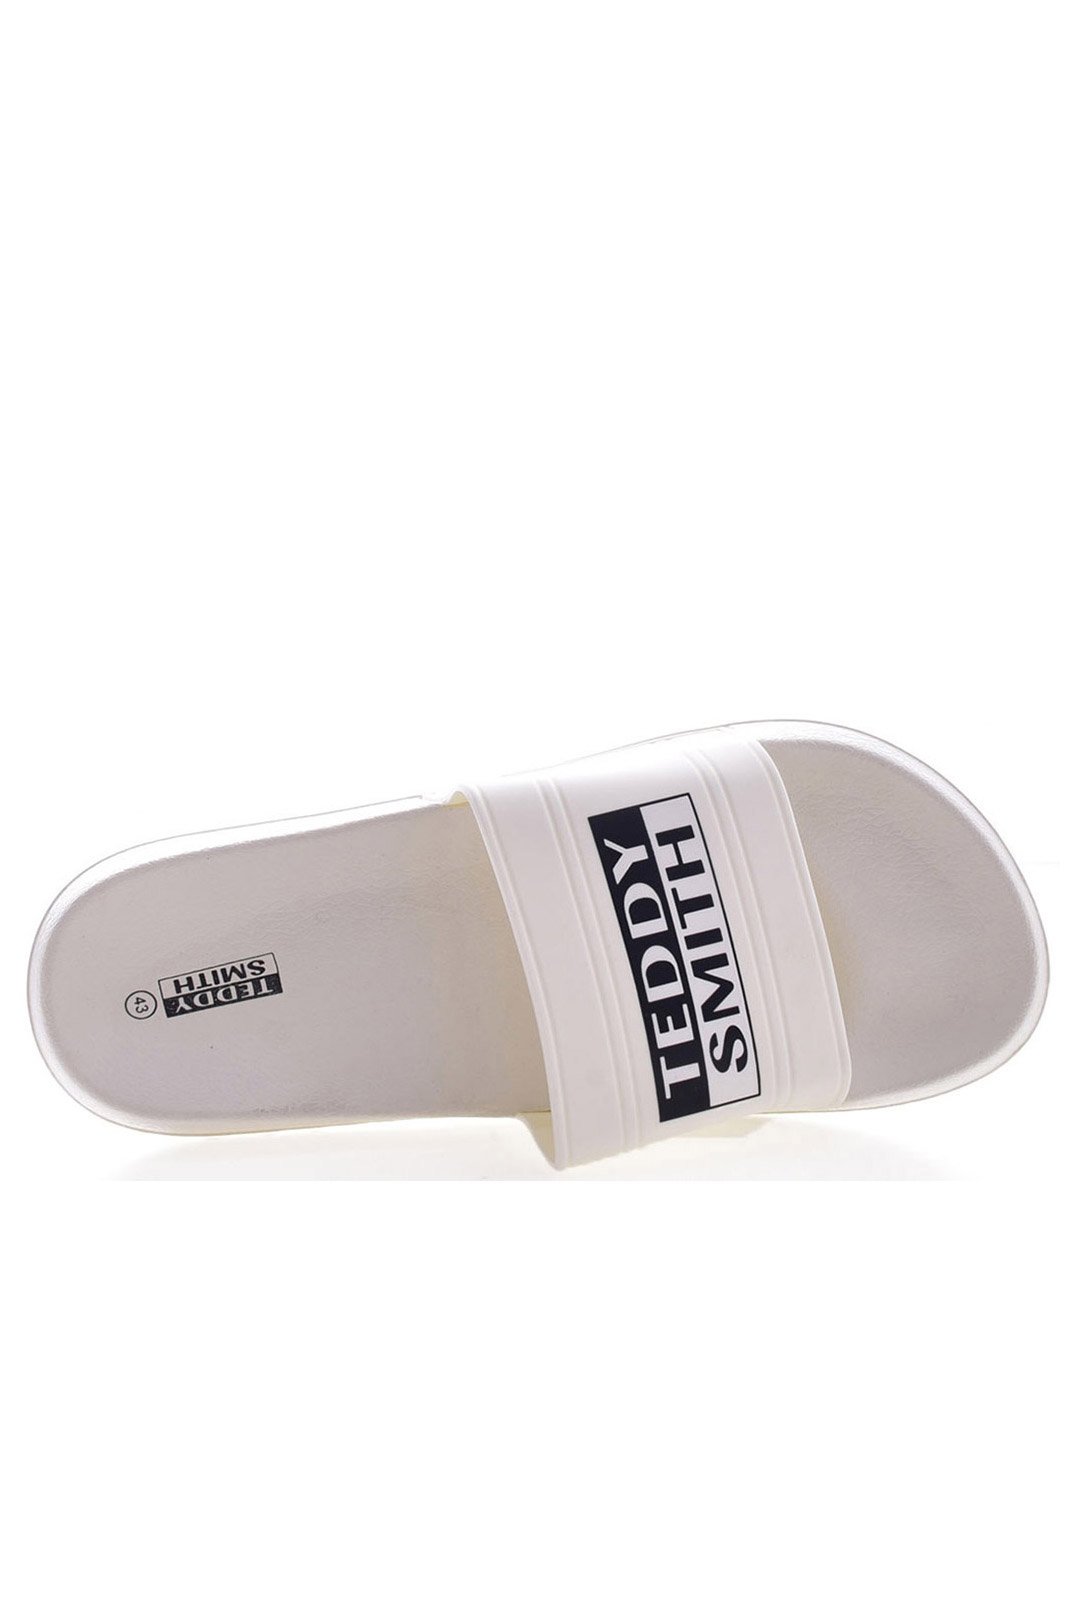 Chaussures   Teddy smith 71457 WHITE